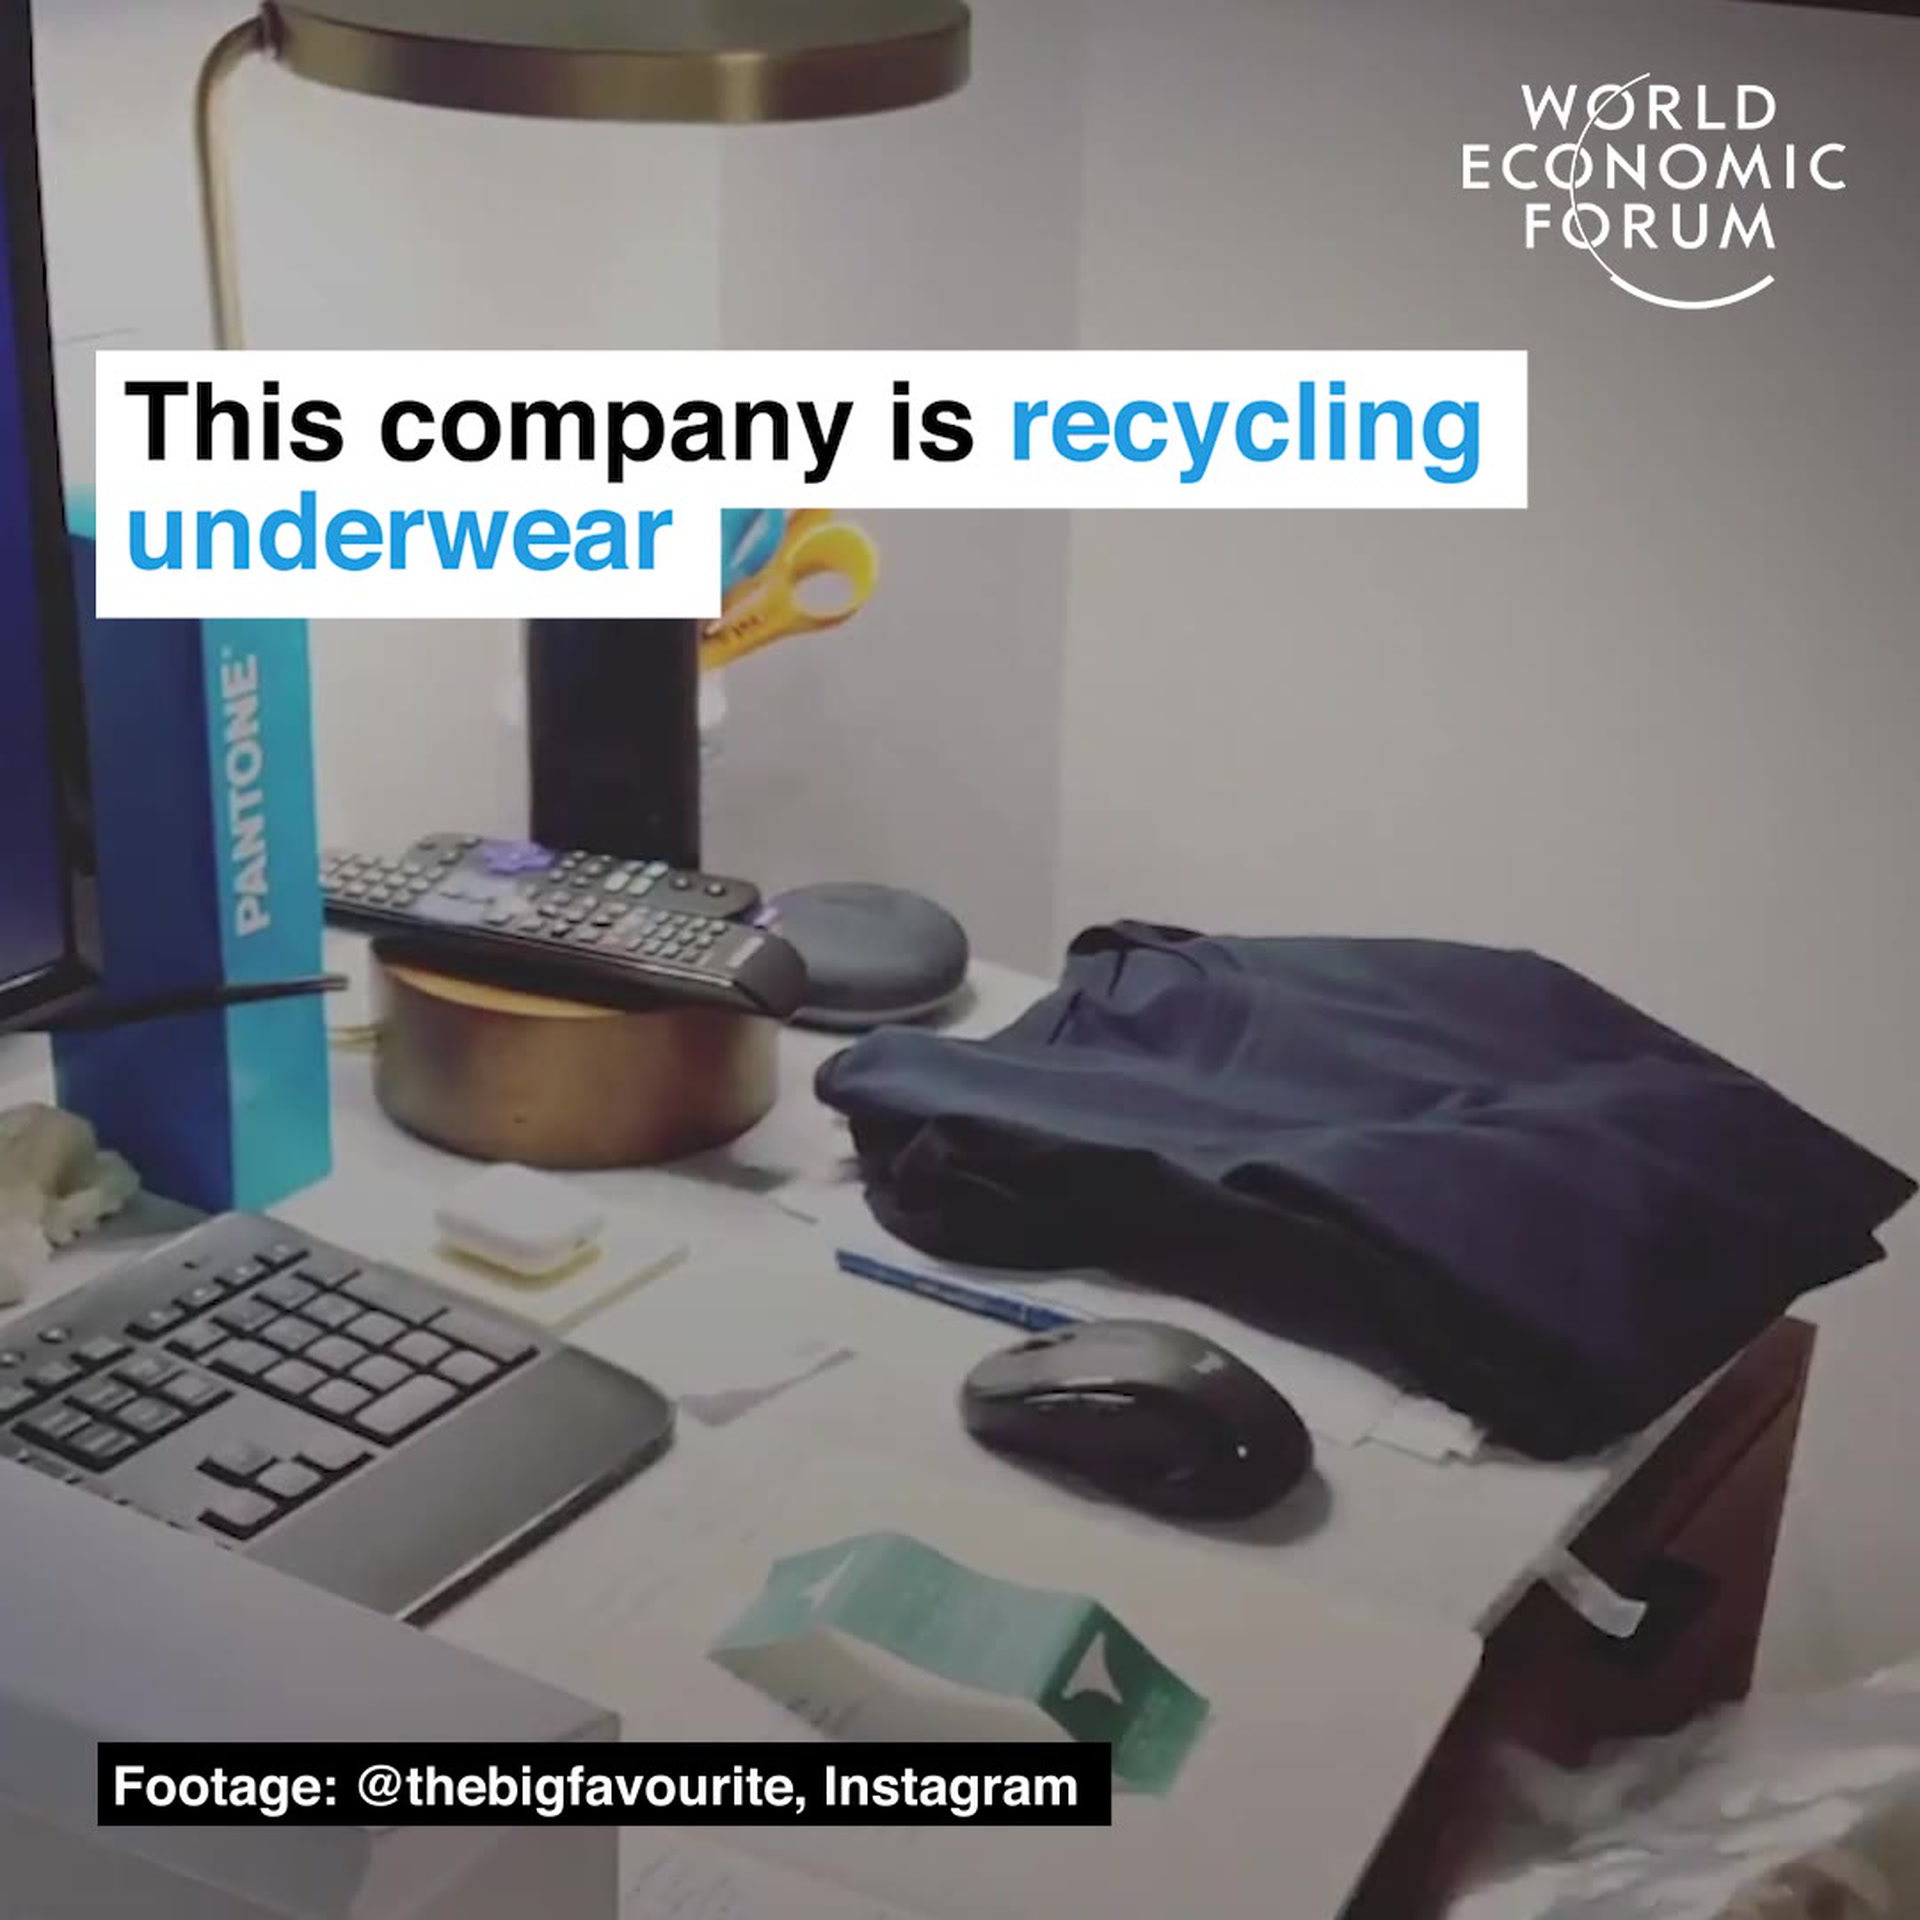 This company is recycling underwear. Here's why